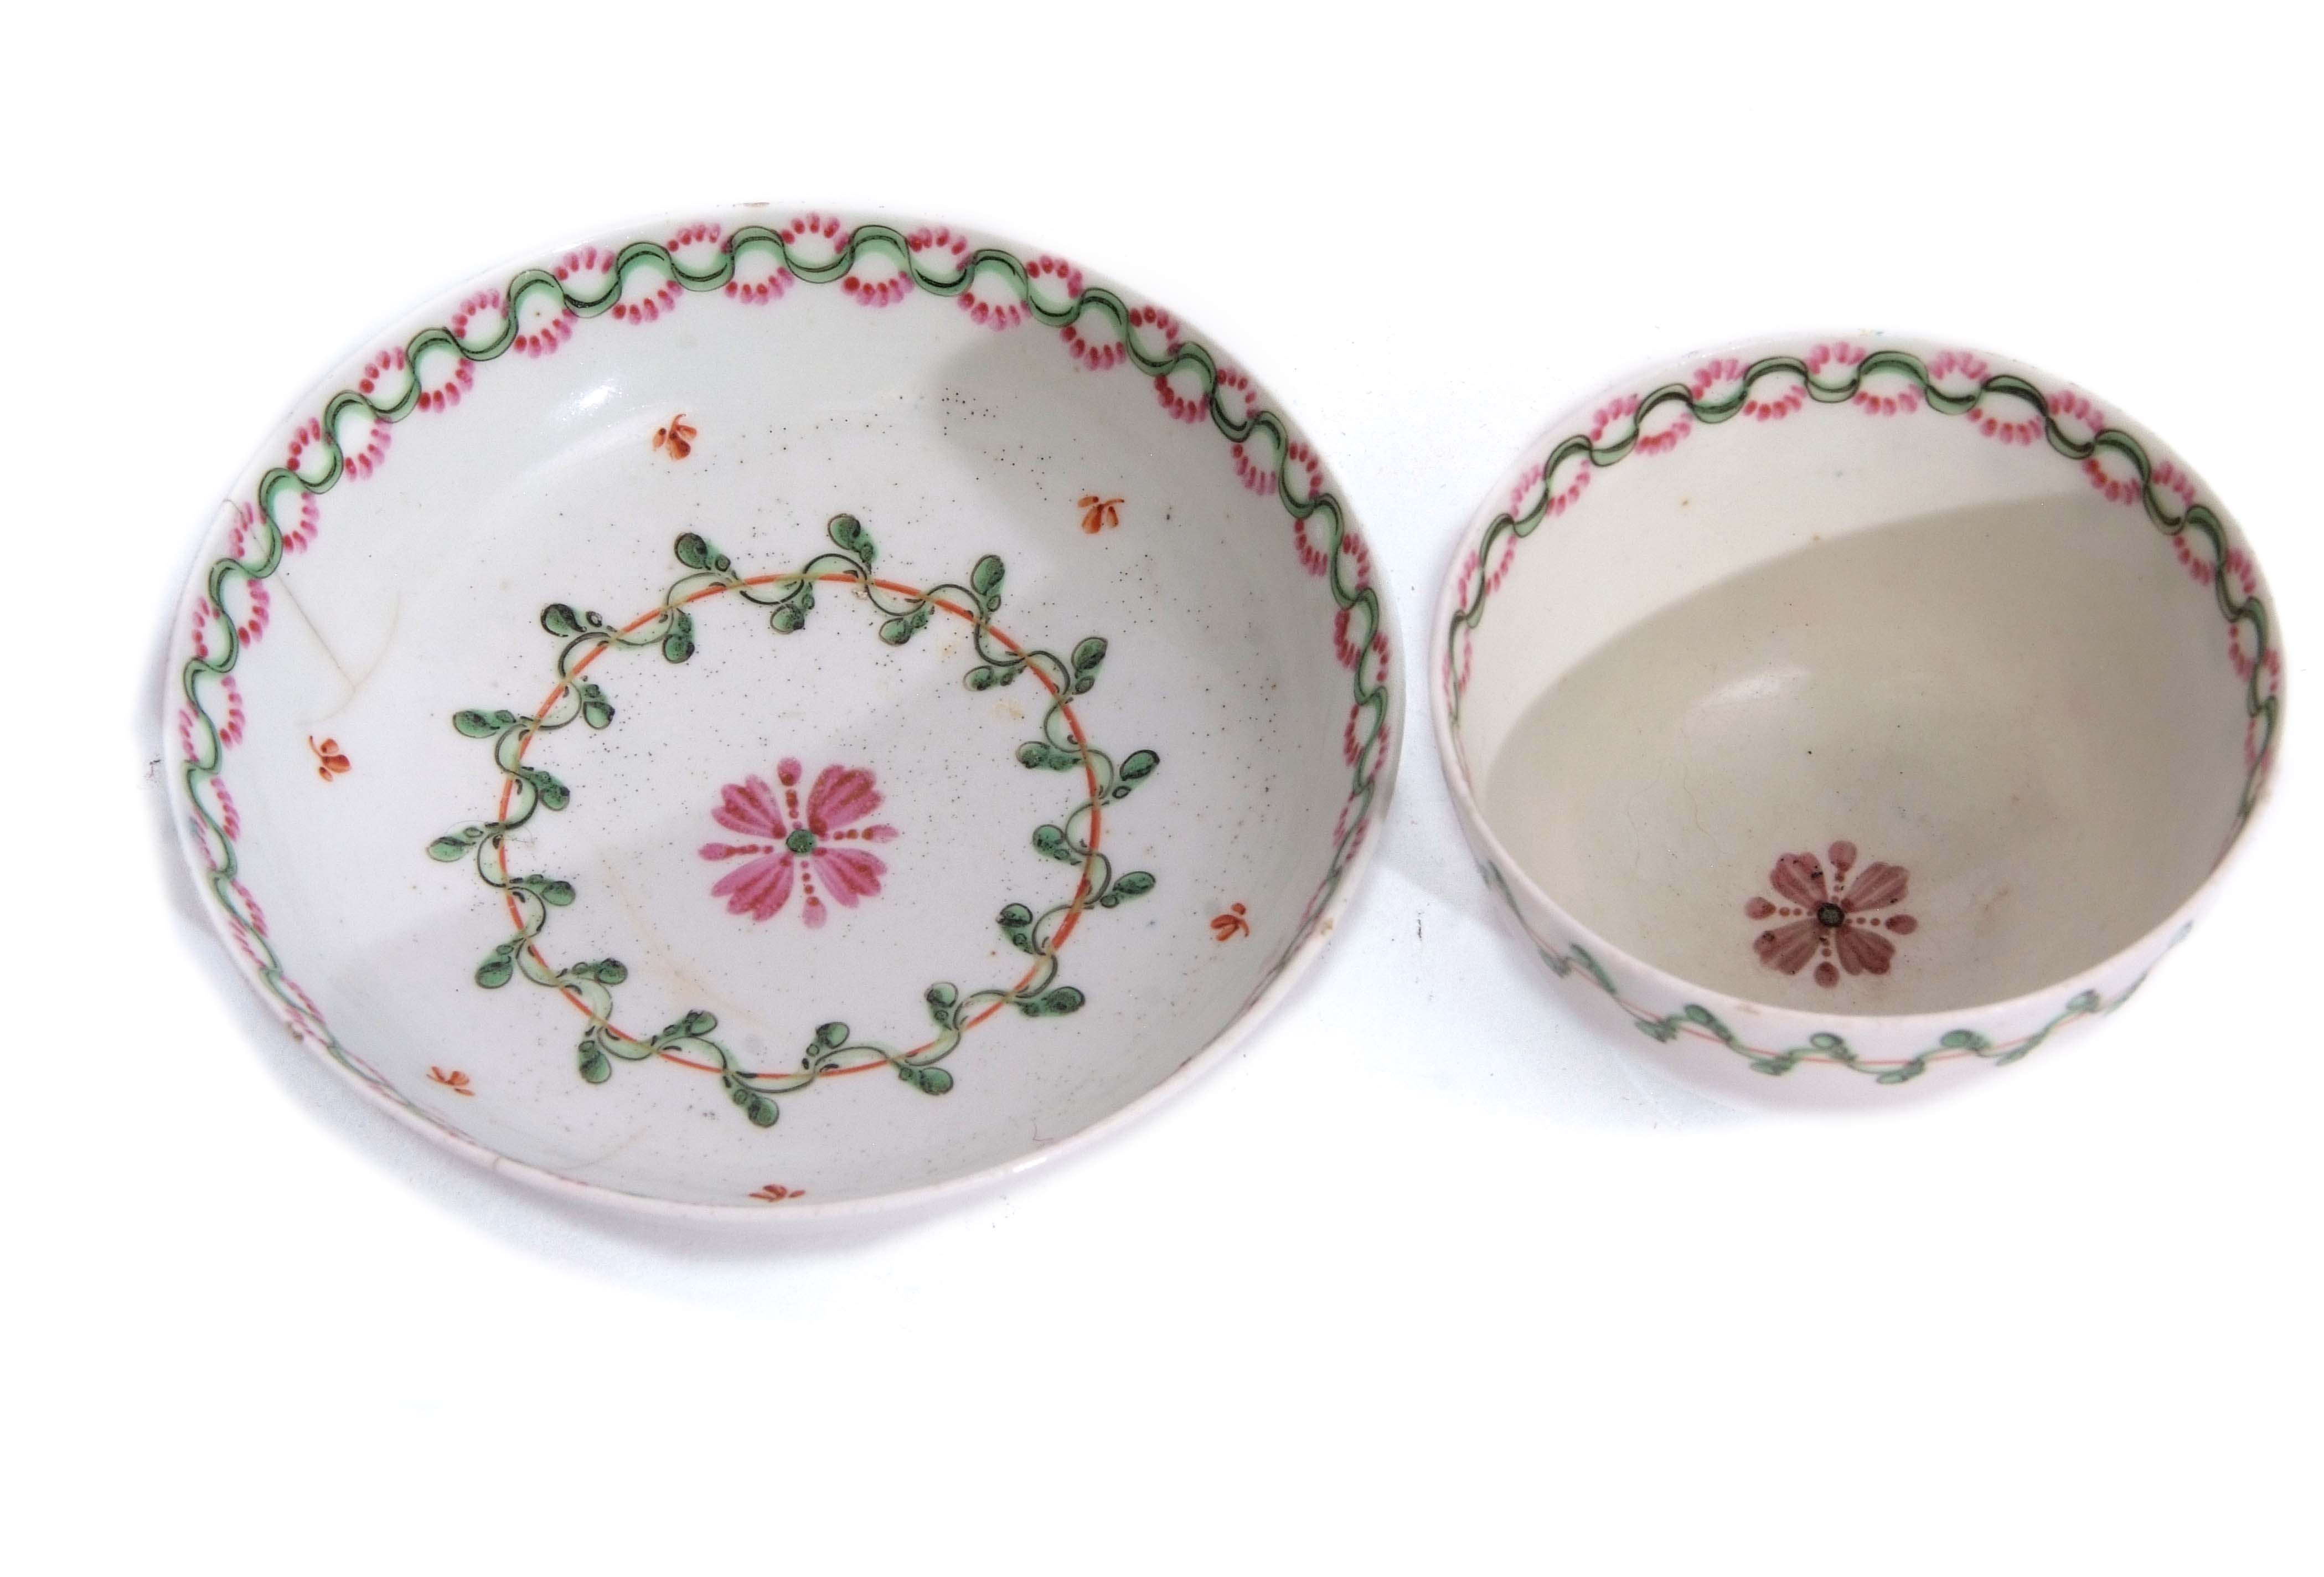 Lowestoft tea bowl and saucer circa 1780 with a polychrome design in green and pink enamel, the